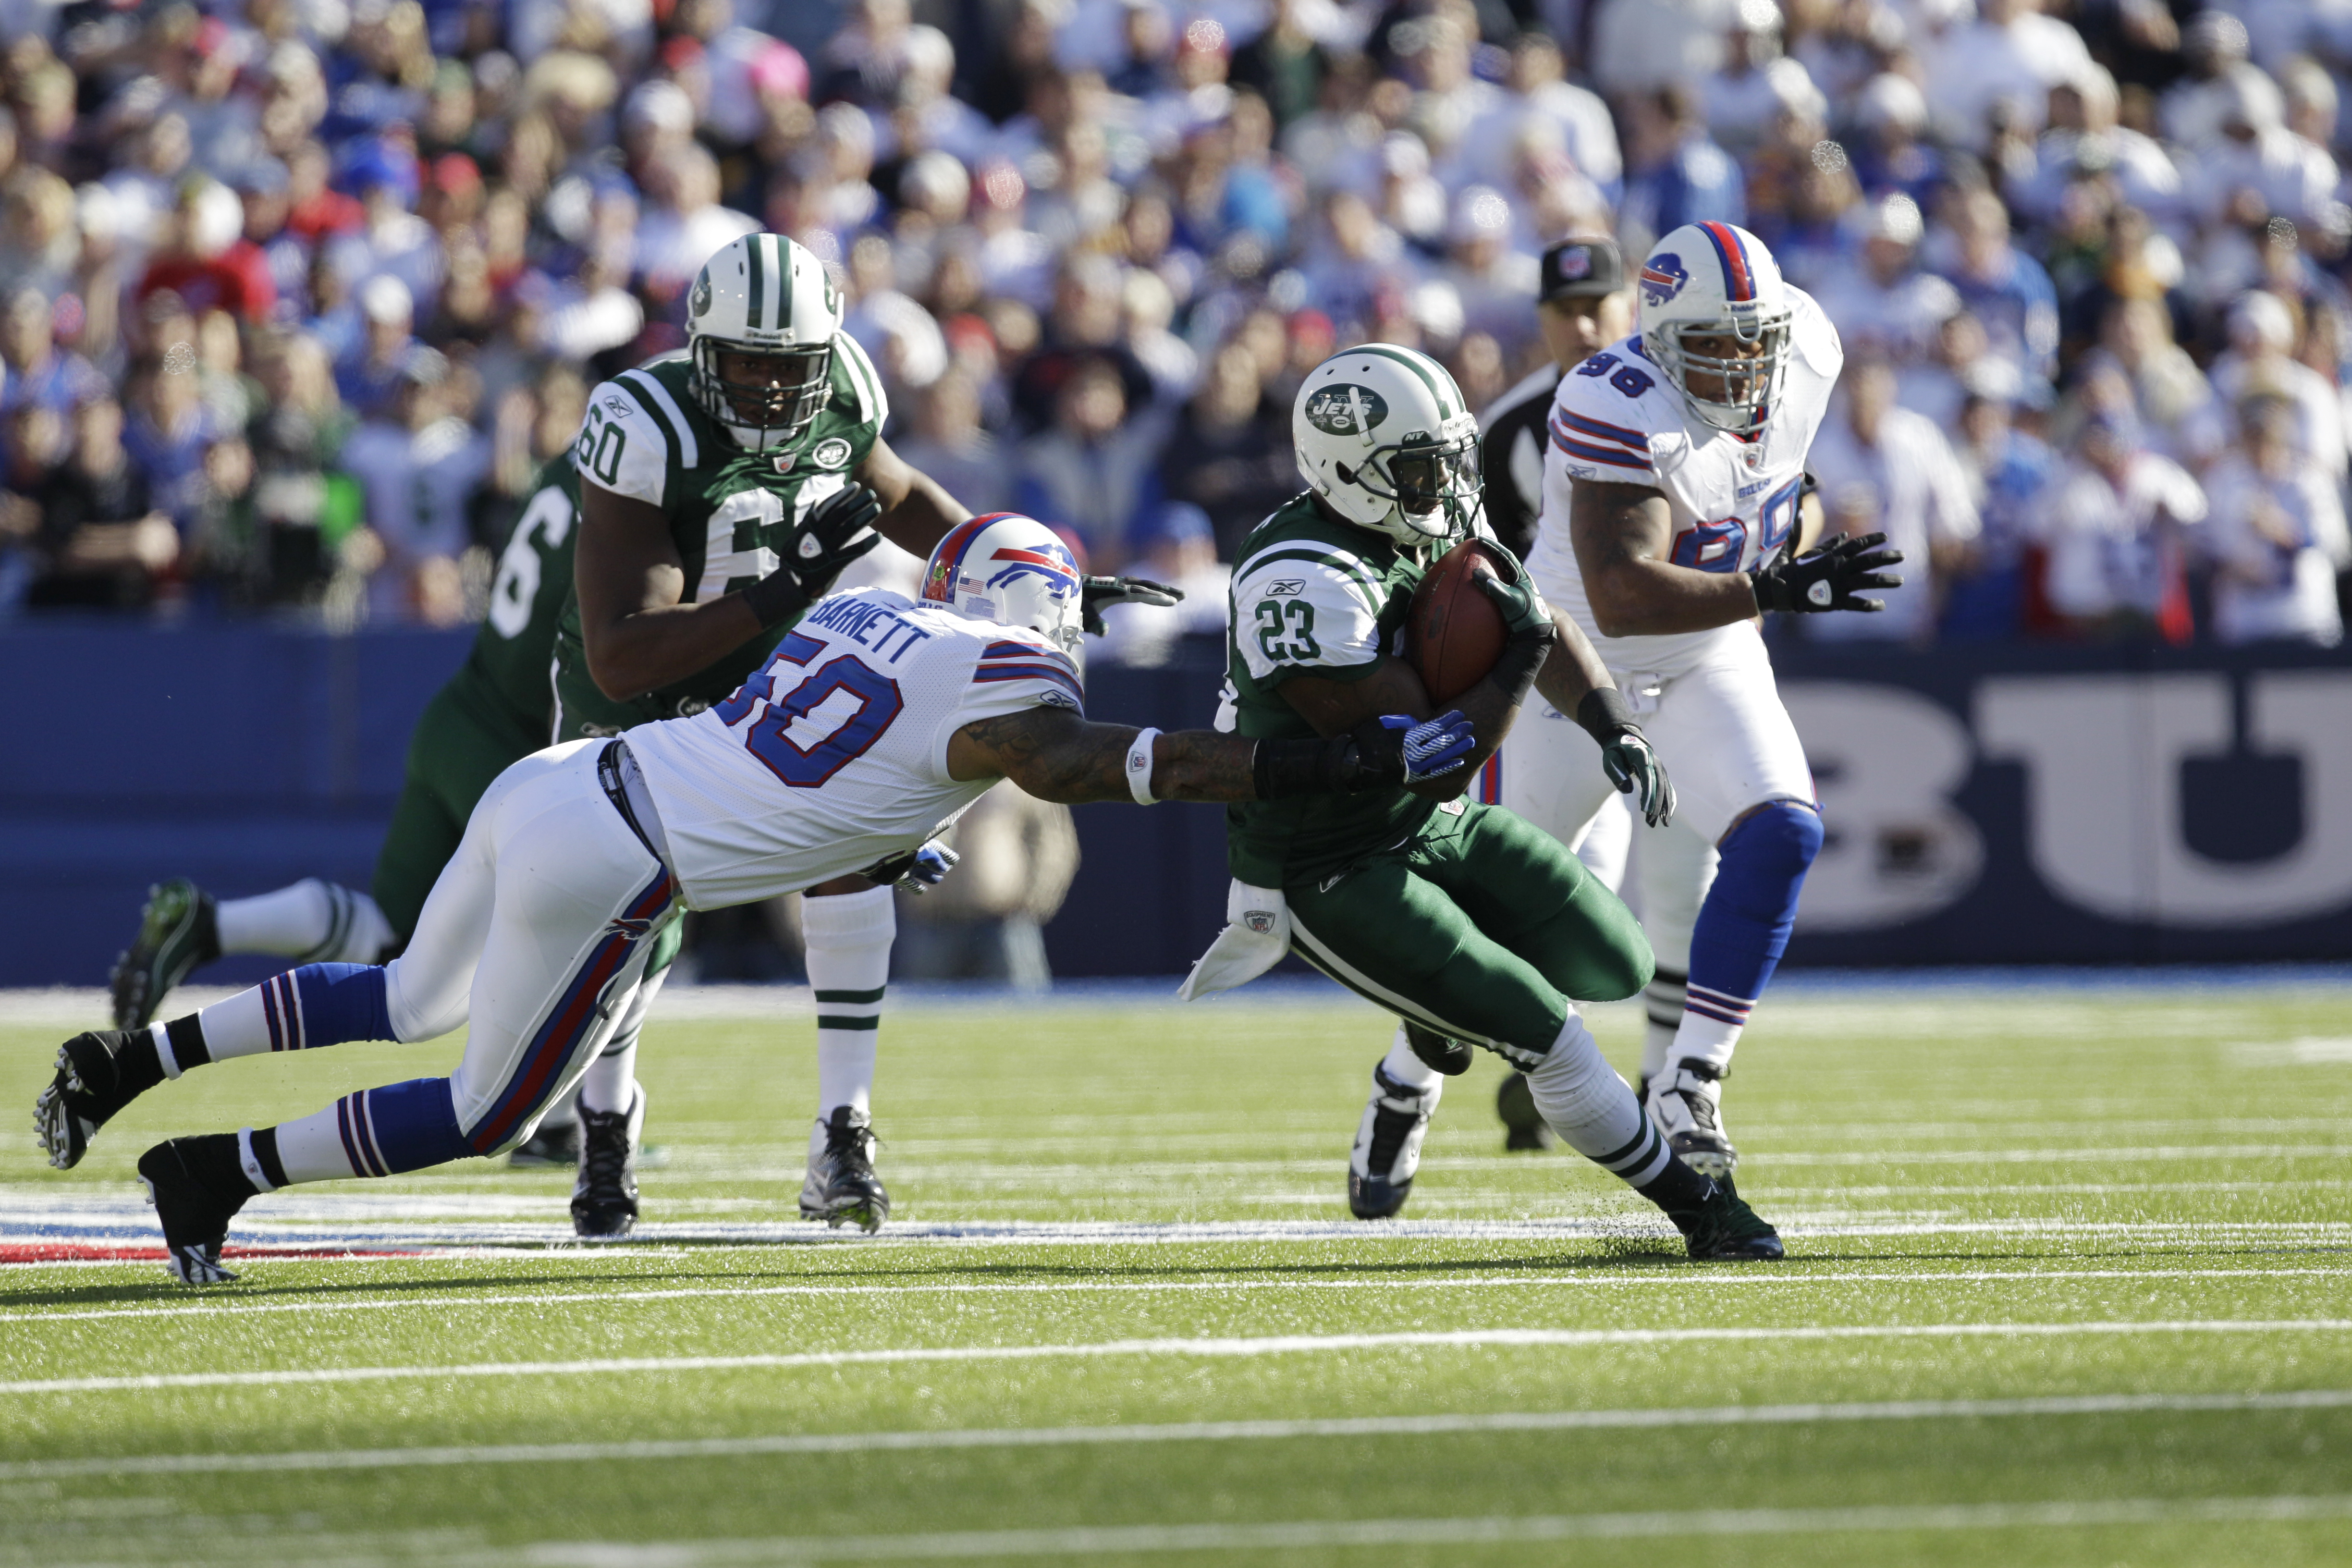 New York Jets to Host Buffalo Bills in Monday Night Football Season Opener  - Sports Illustrated New York Jets News, Analysis and More